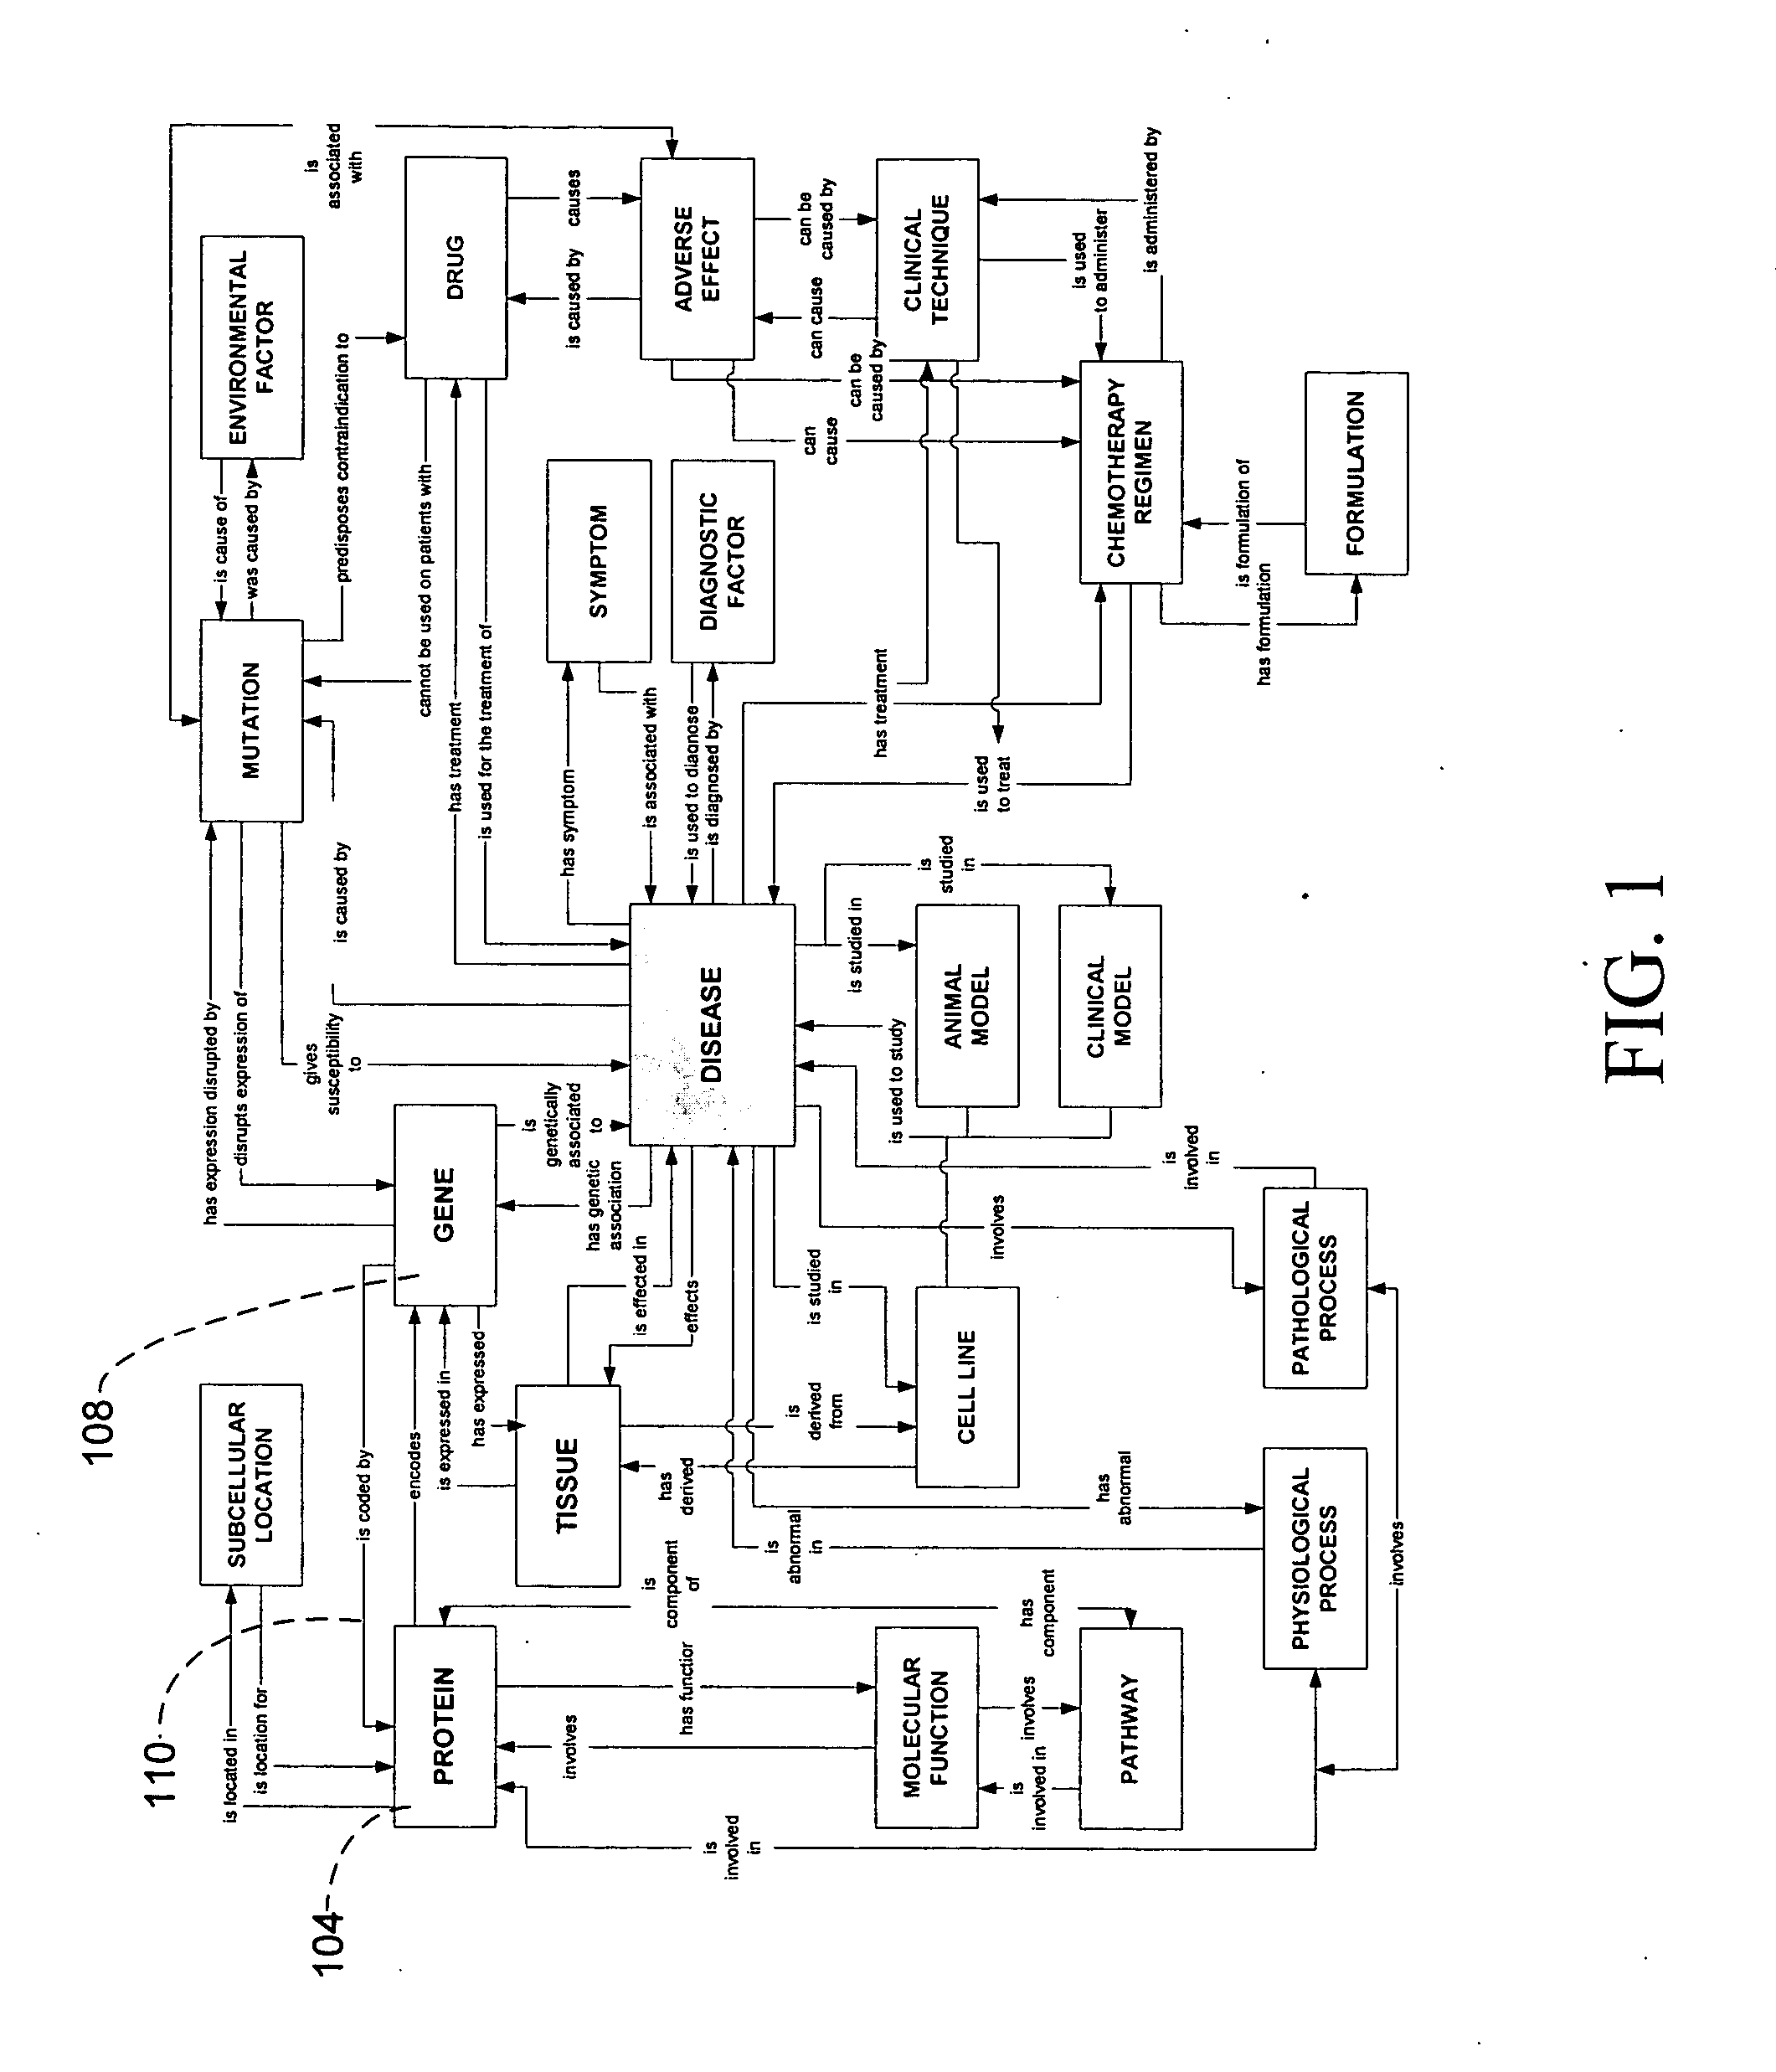 System and method for data extraction and management in multi-relational ontology creation